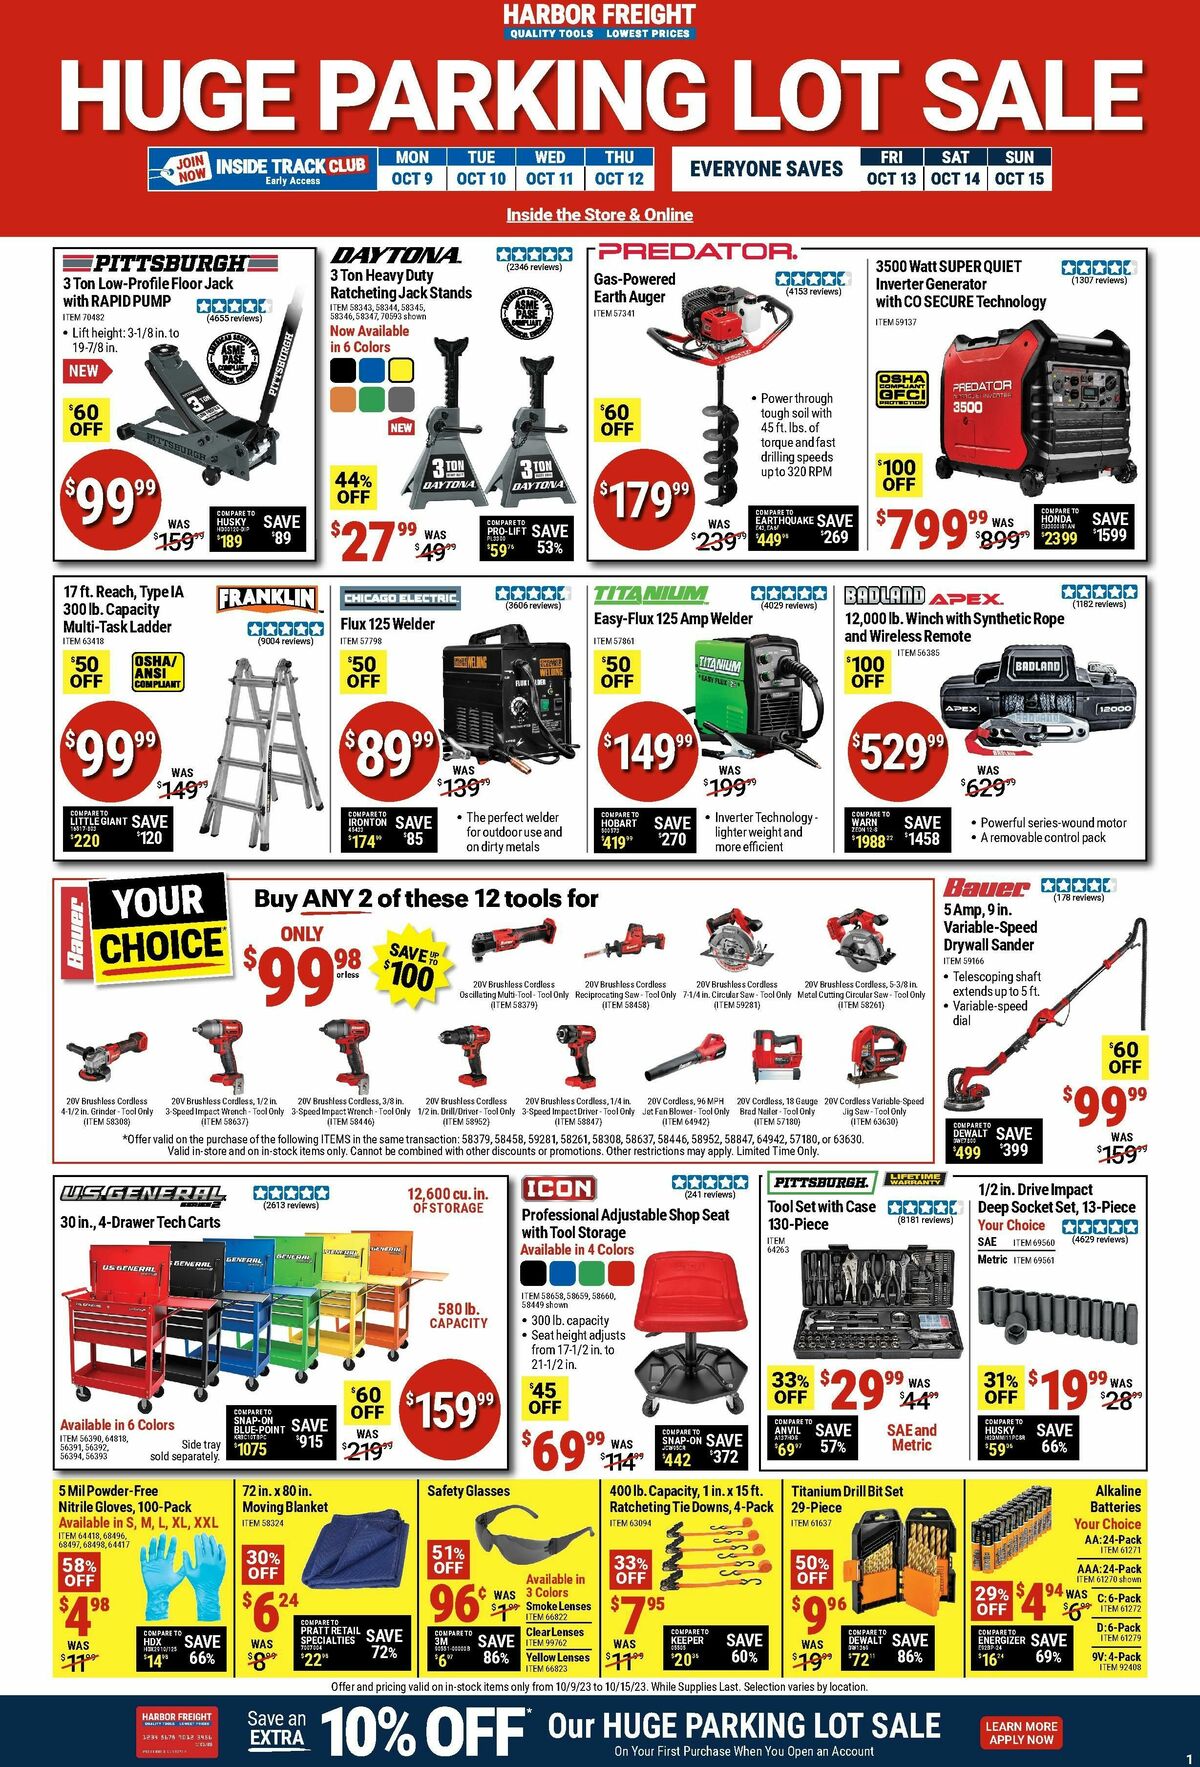 Harbor Freight Tools Weekly Ad from October 9